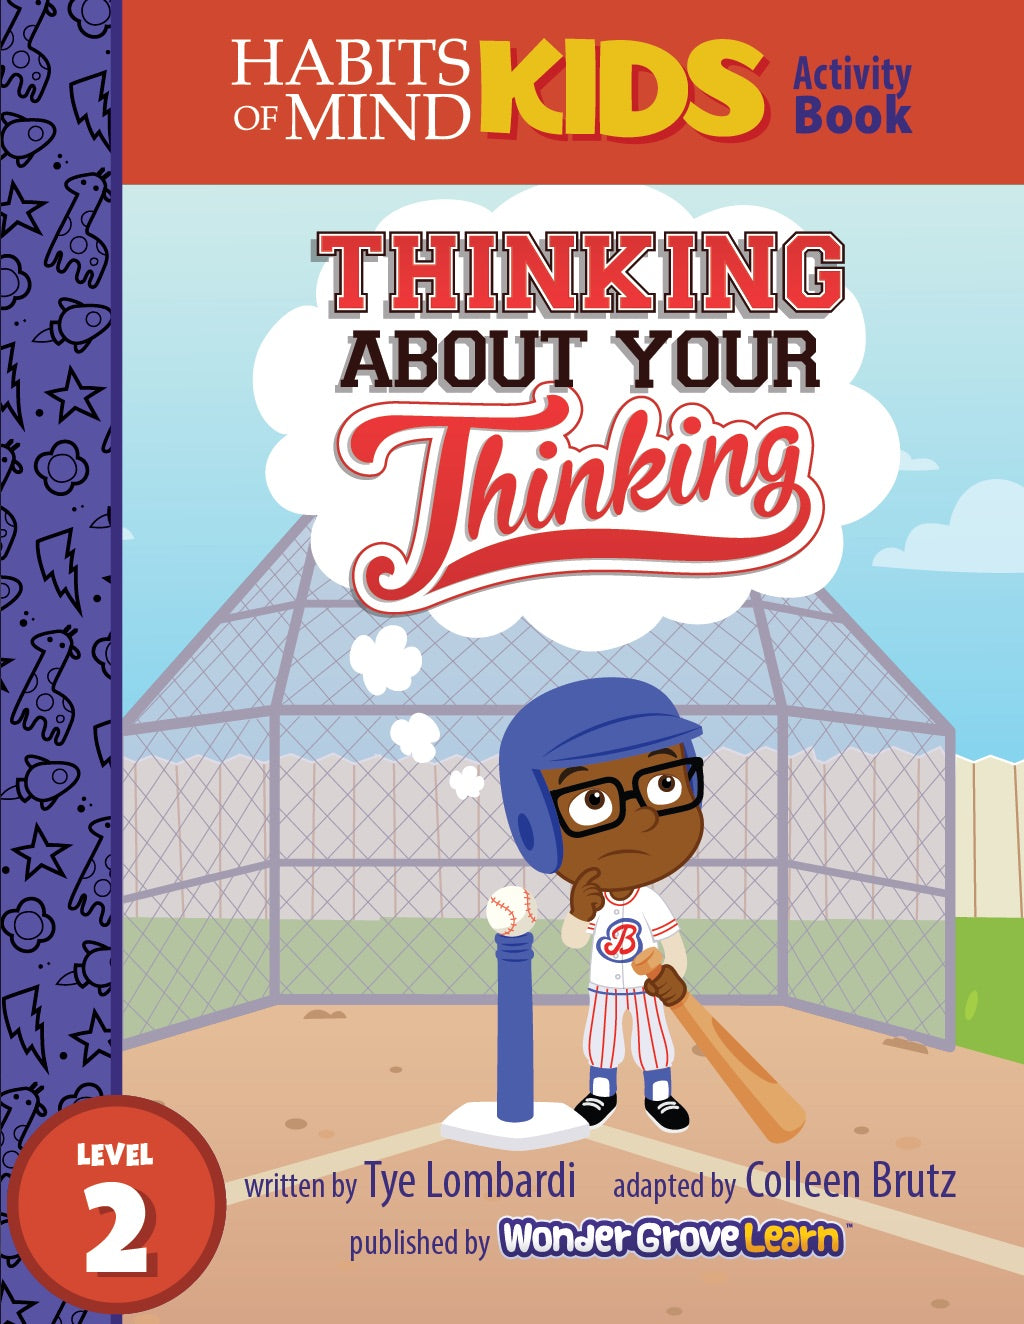 Thinking About Your Thinking: A Habits of Mind Story for Second Grade